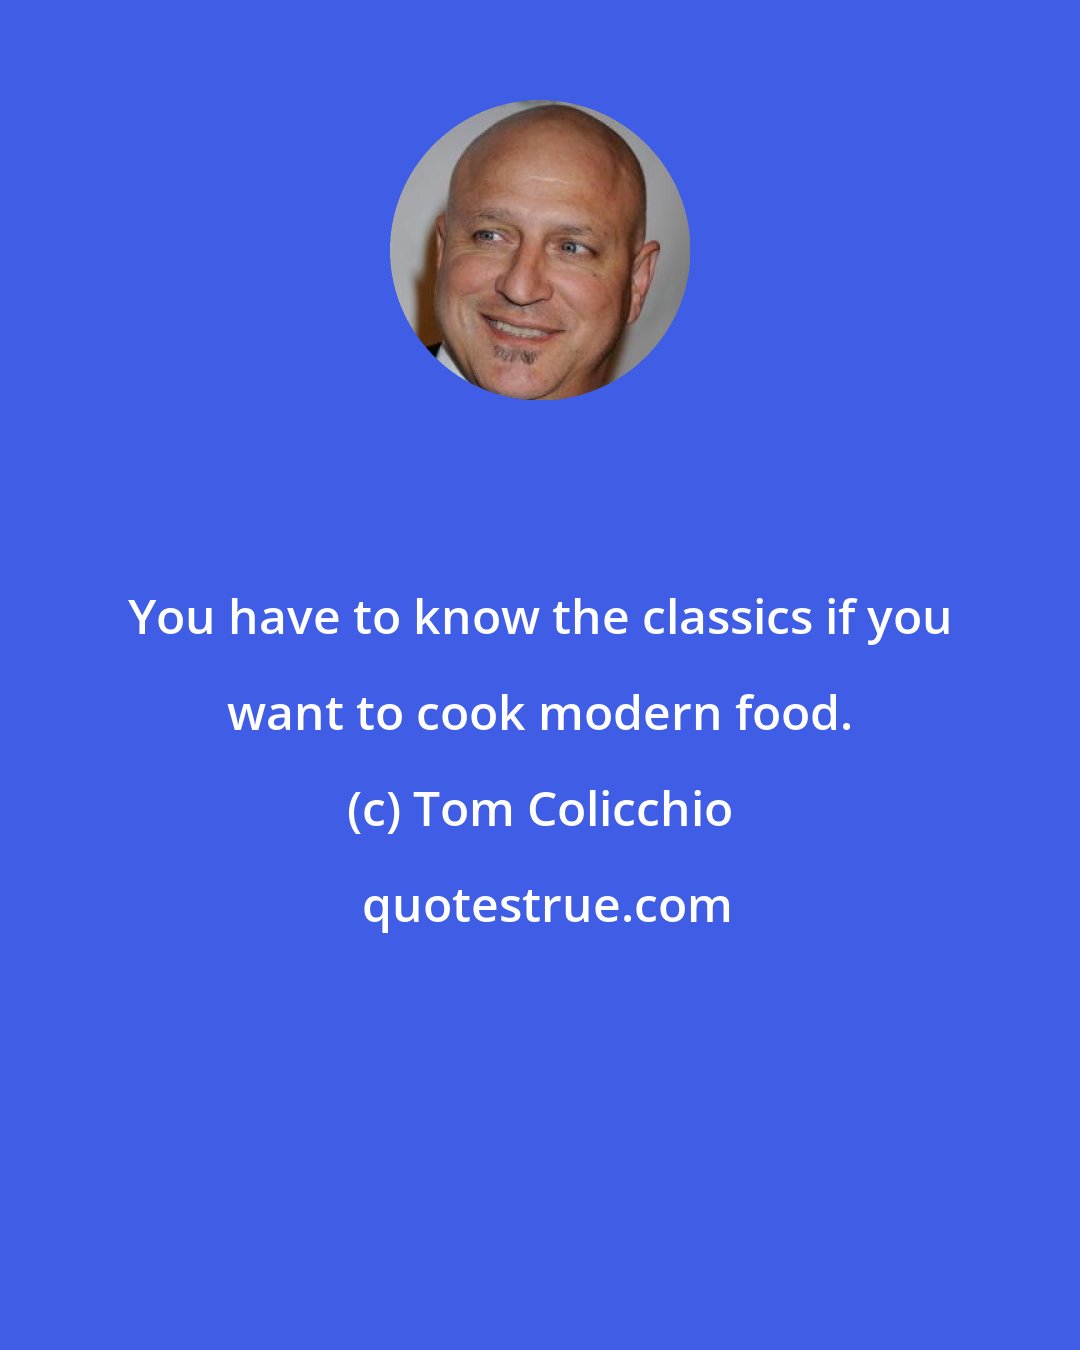 Tom Colicchio: You have to know the classics if you want to cook modern food.